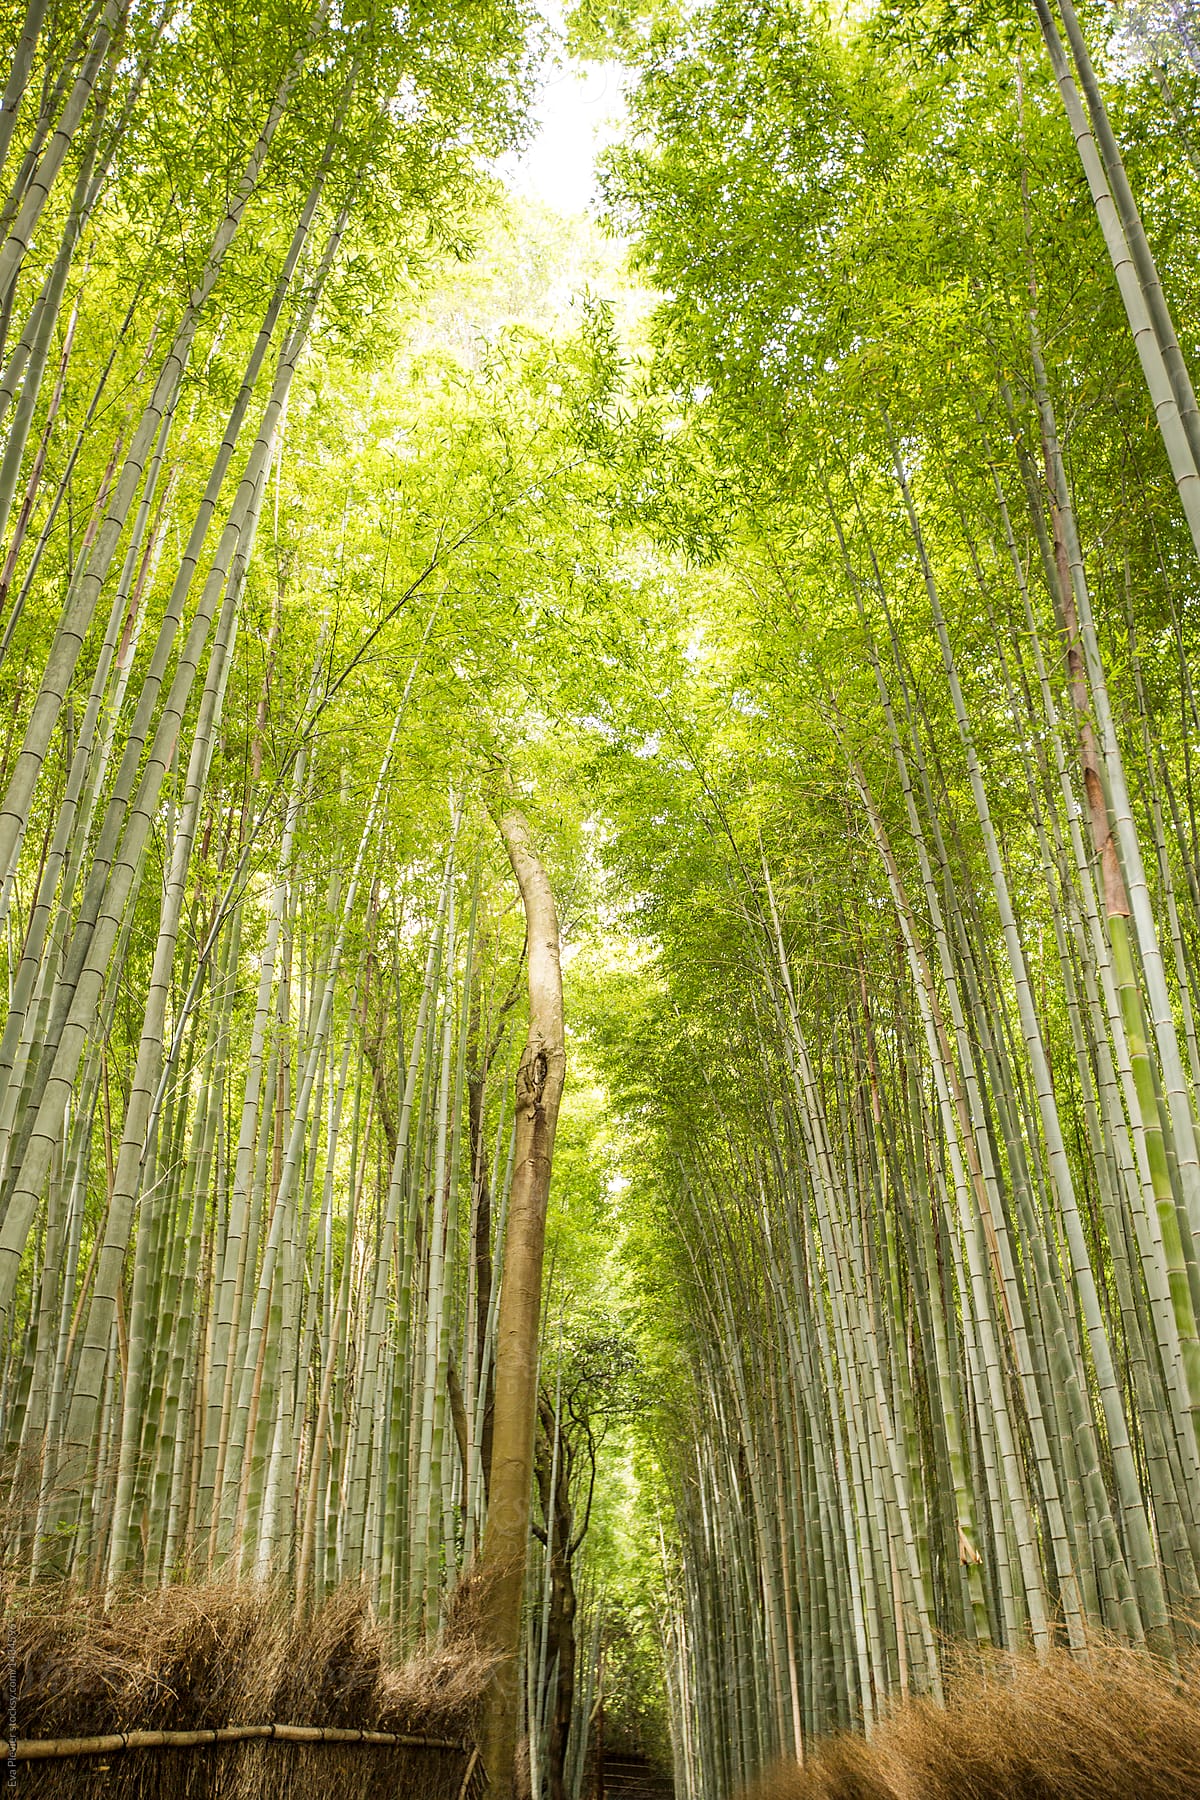 Beautiful path running through a bamboo forest.